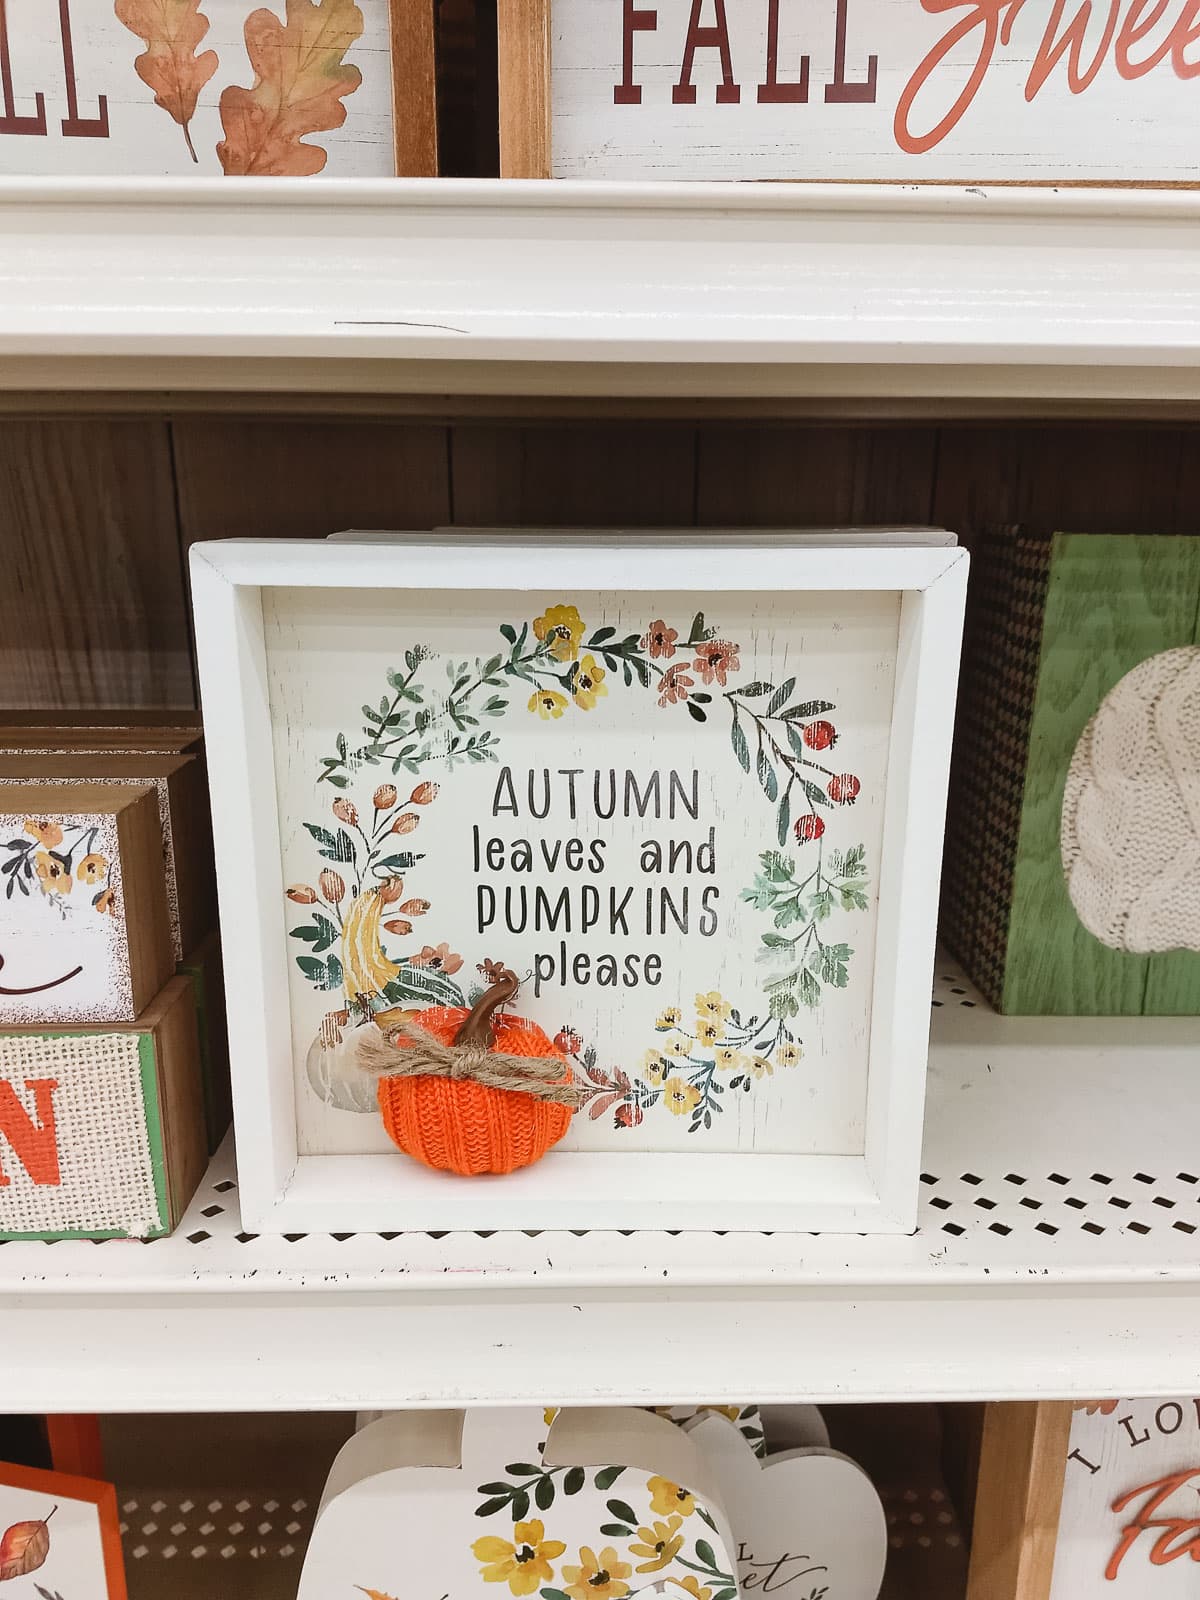 Festive Fall Home Décor from Michael’s!